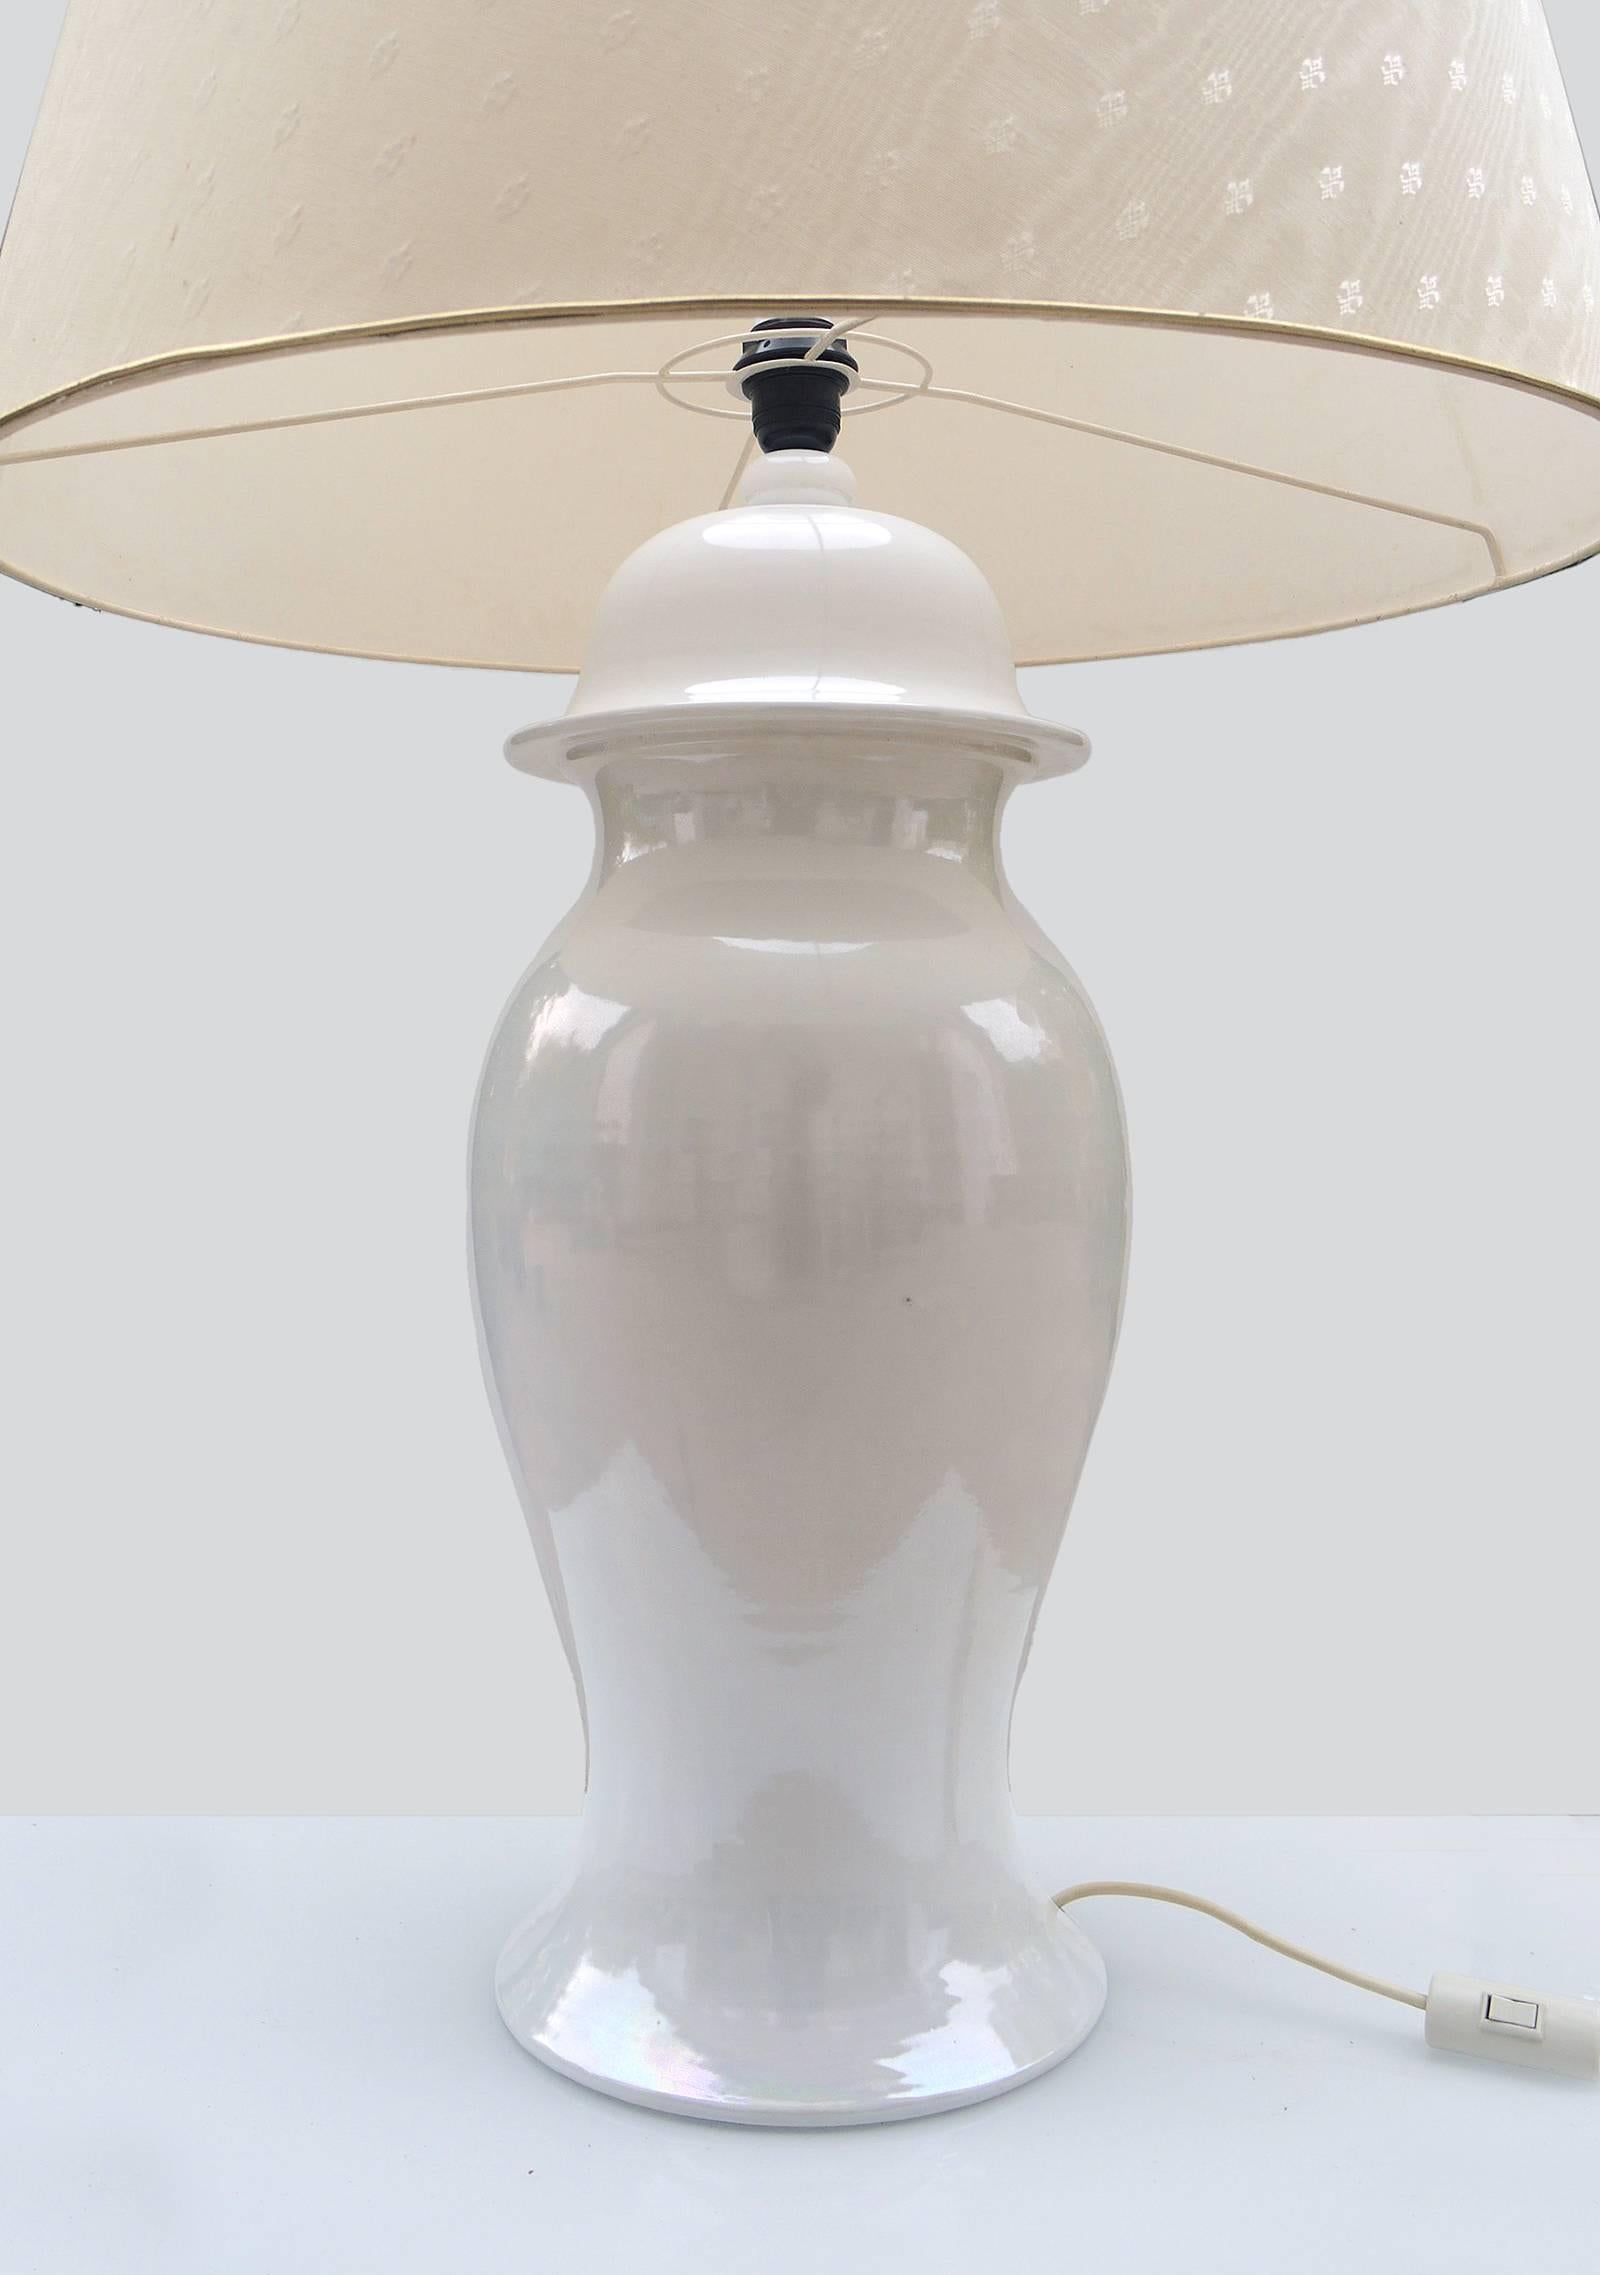 Elegant rare, huge Tommaso Barbi ginger jar ceramic lamp made in Italy in the 1960s. Crème ivory colored ceramic base, original fabric shade with emblem pattern. Signed at base. 
 
Measures: height including shade 41.3